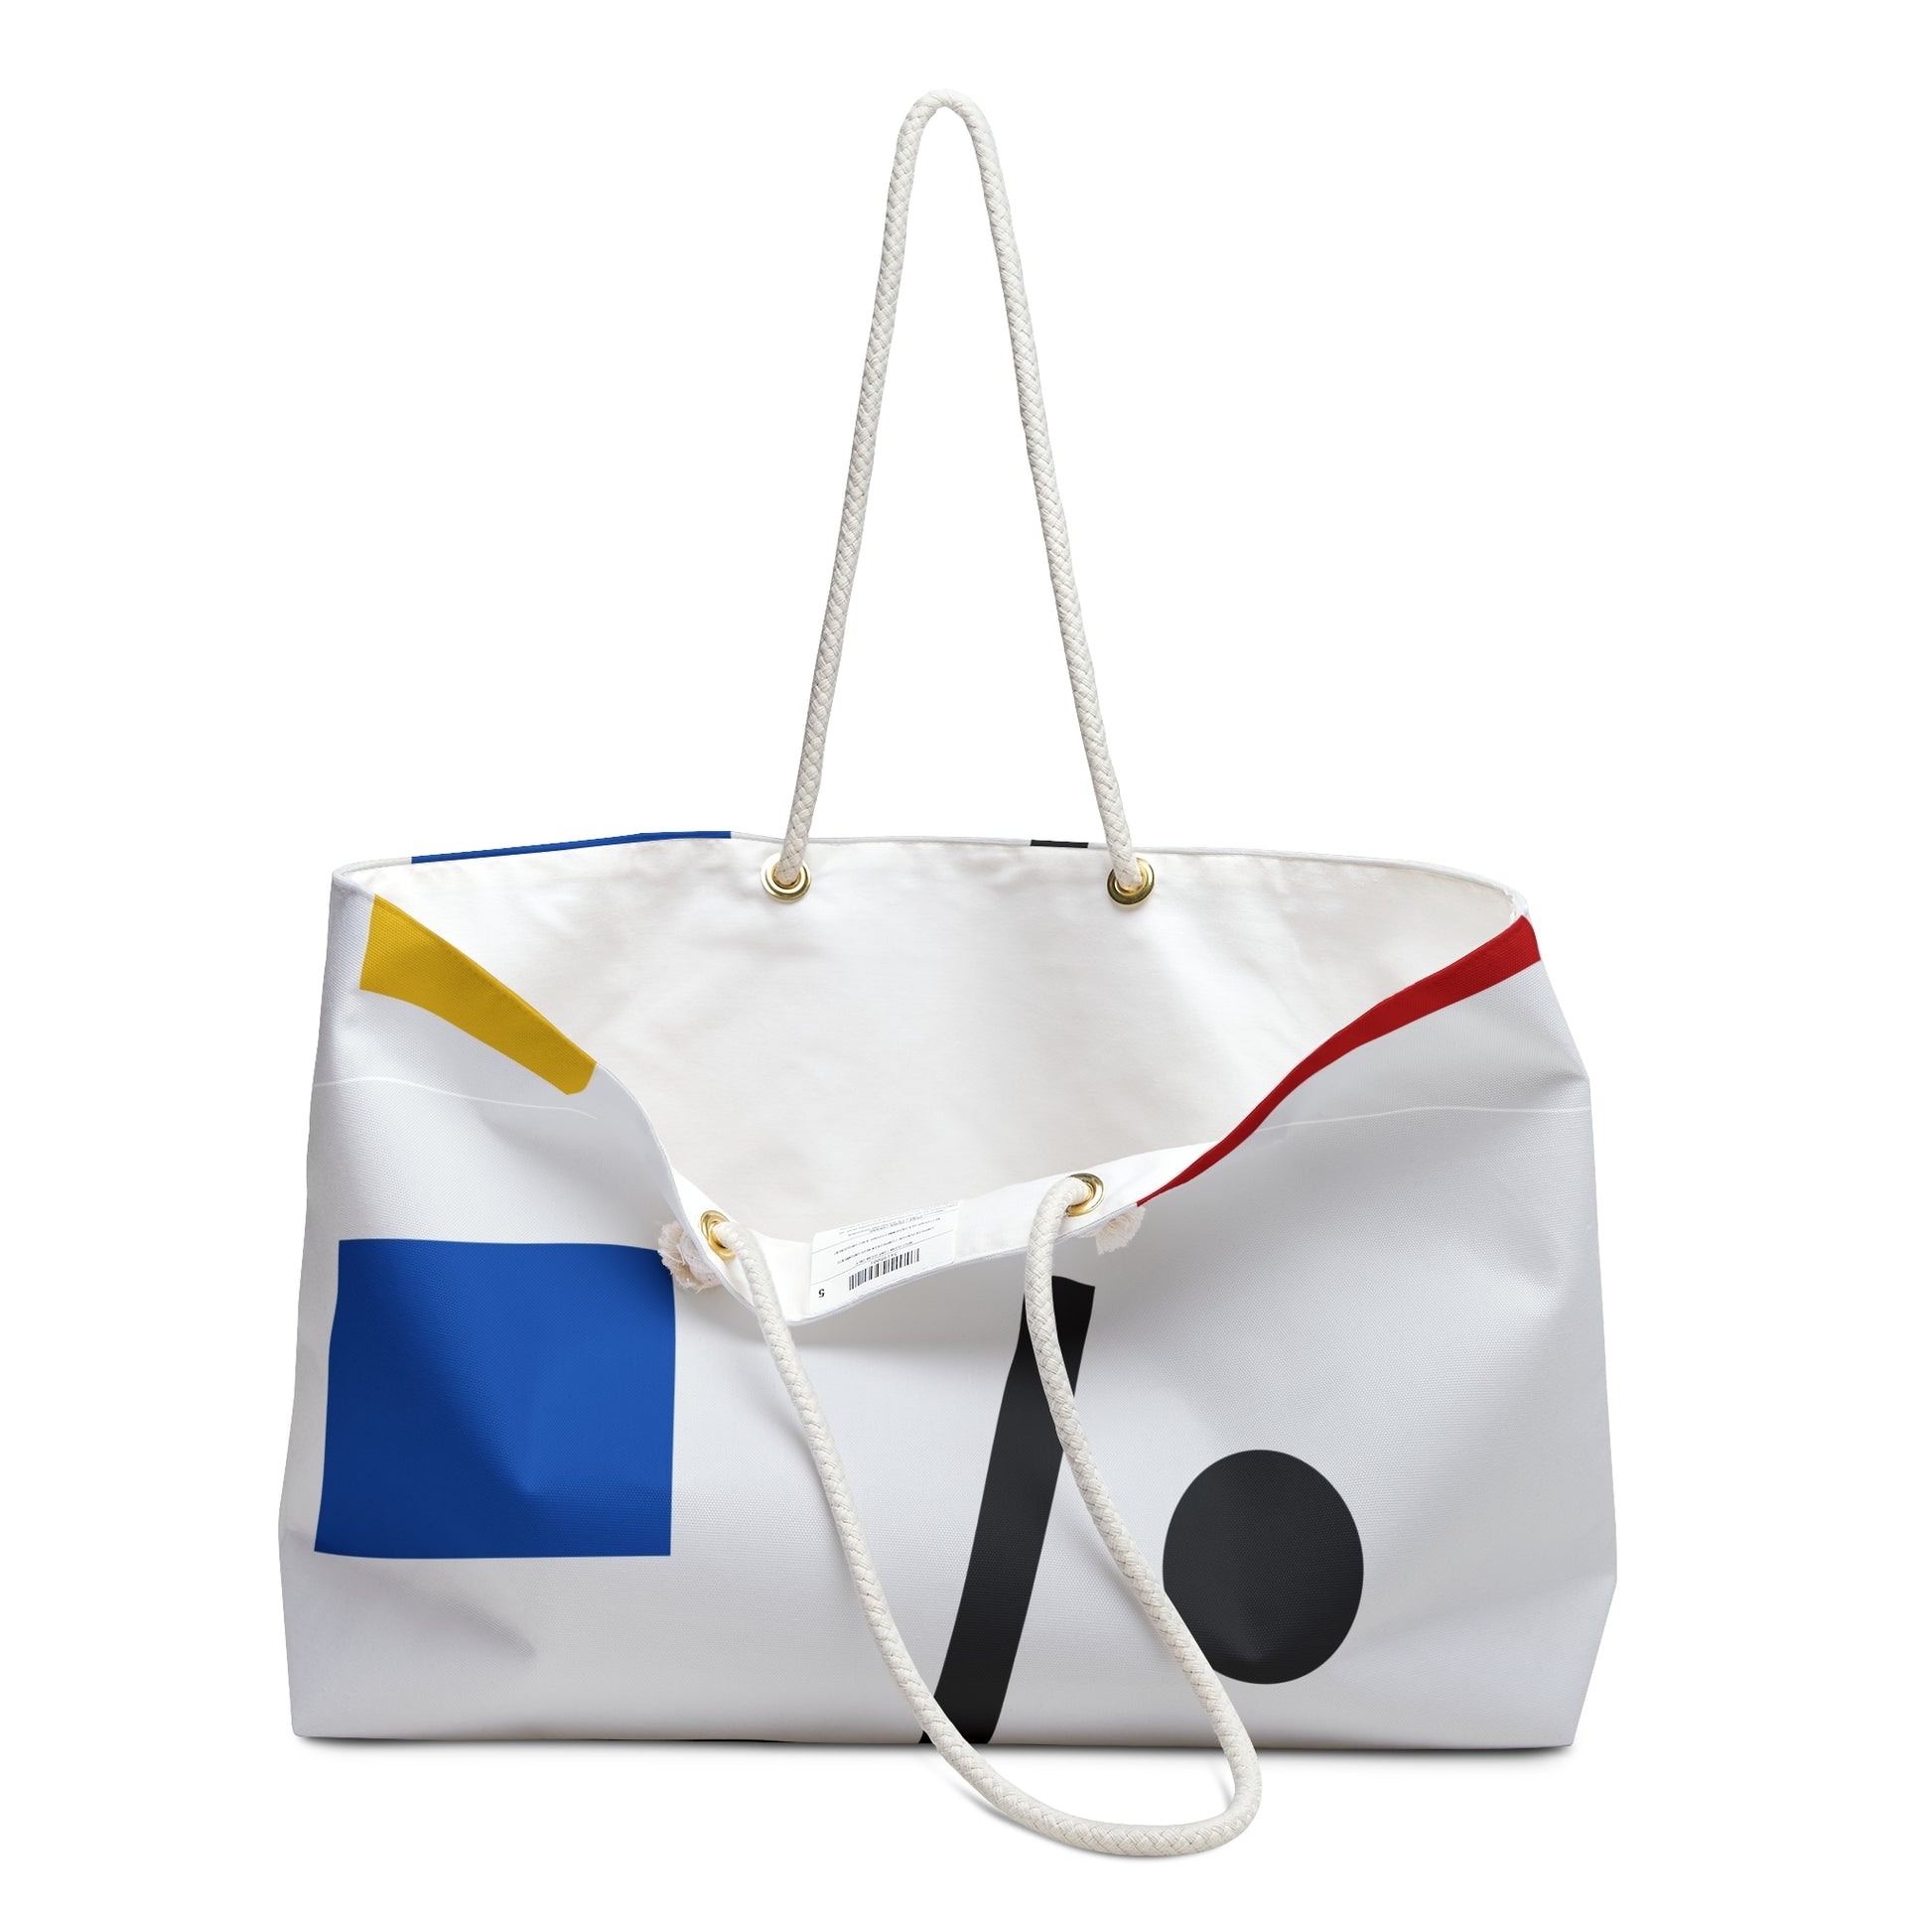 MYRIAM THYES - COMPOSITION WITH BROKEN CROSS, 2017 - WEEKENDER TOTE BAG